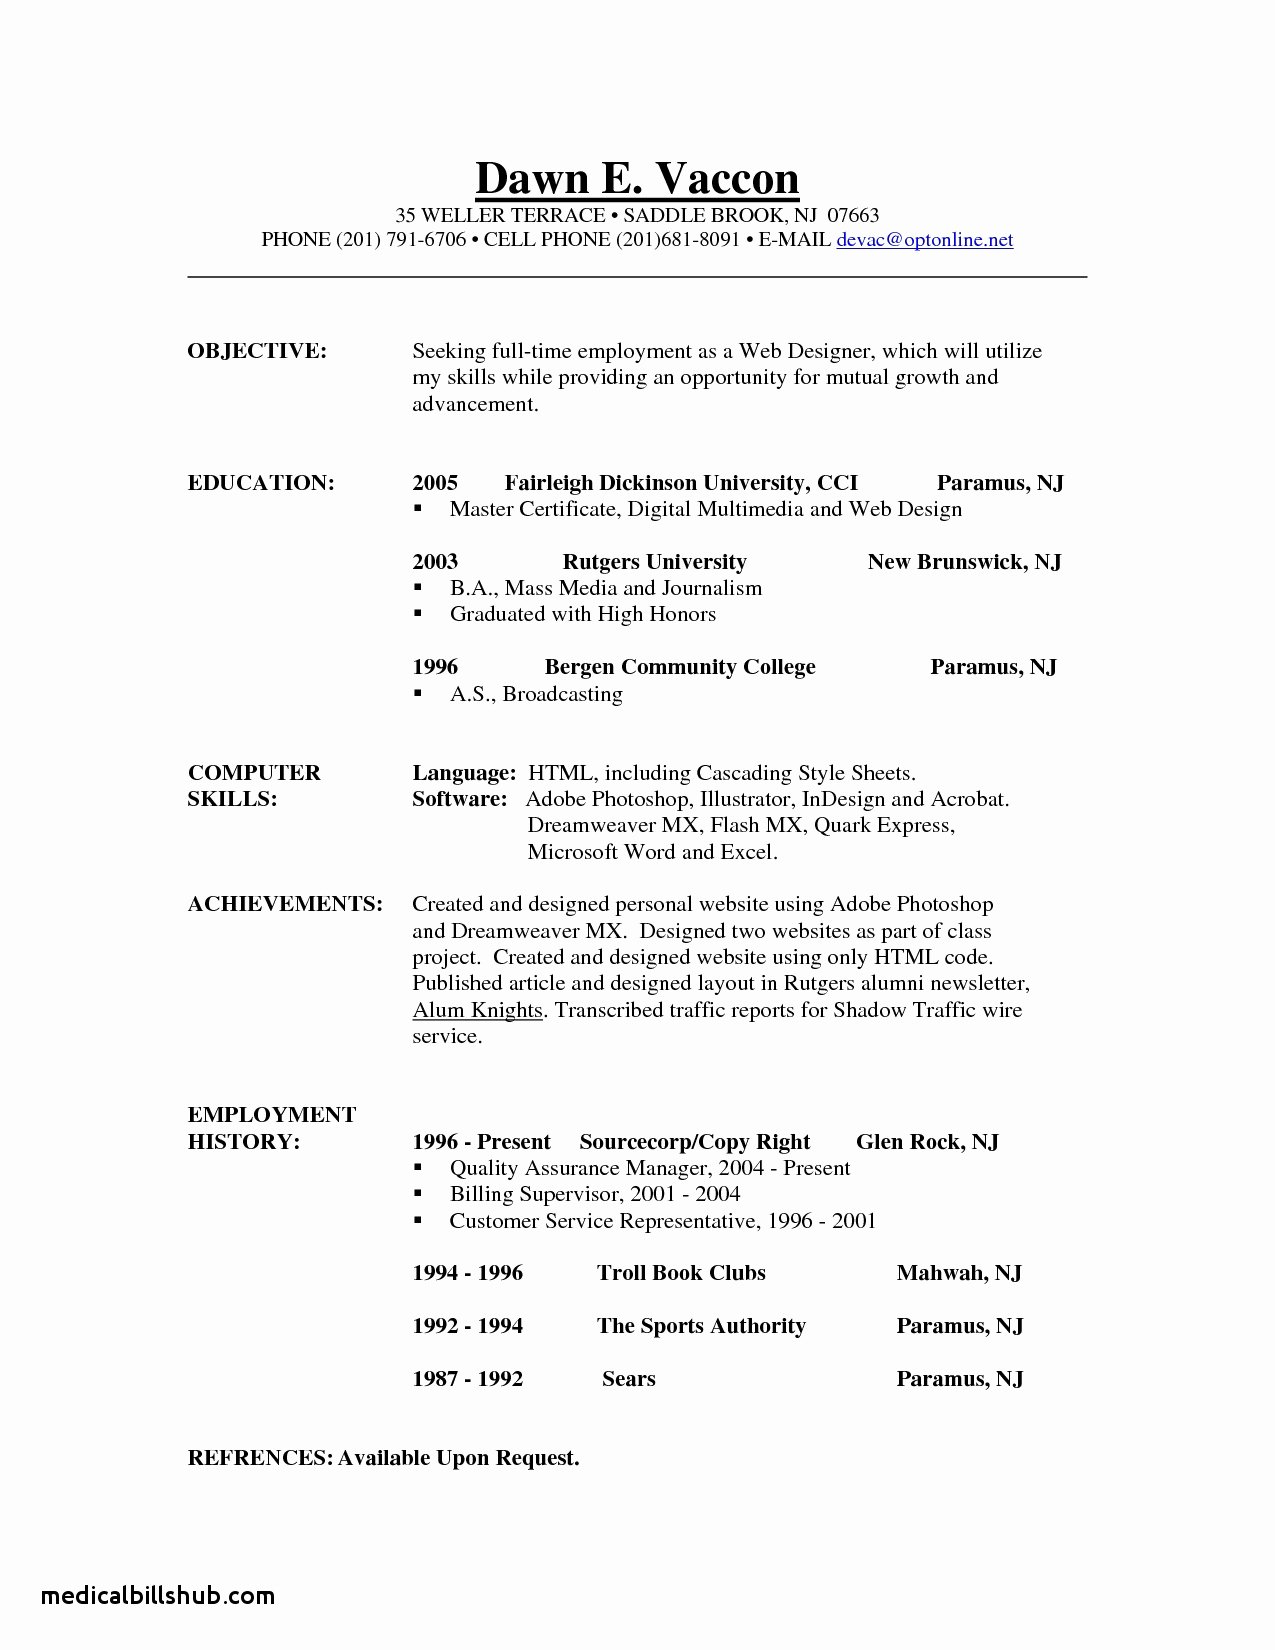 Child Care Resume Objectives associates Degree In